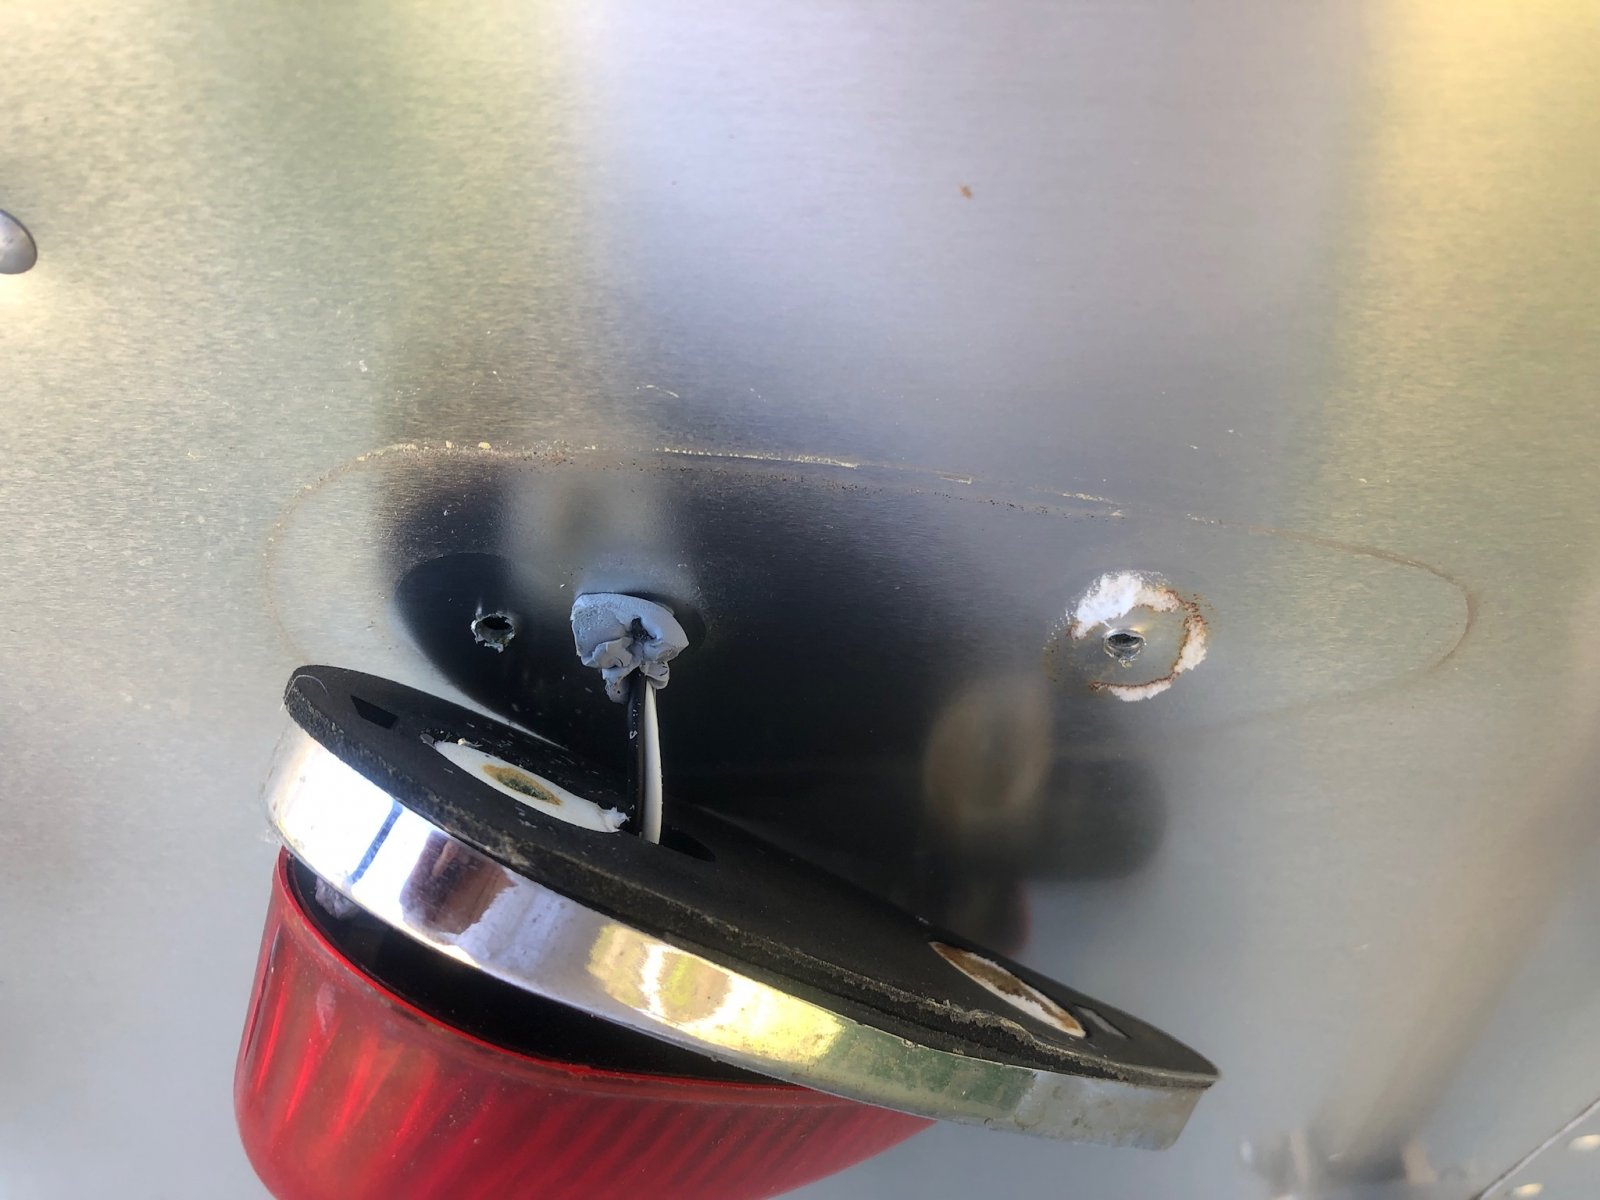 Clearance light removal